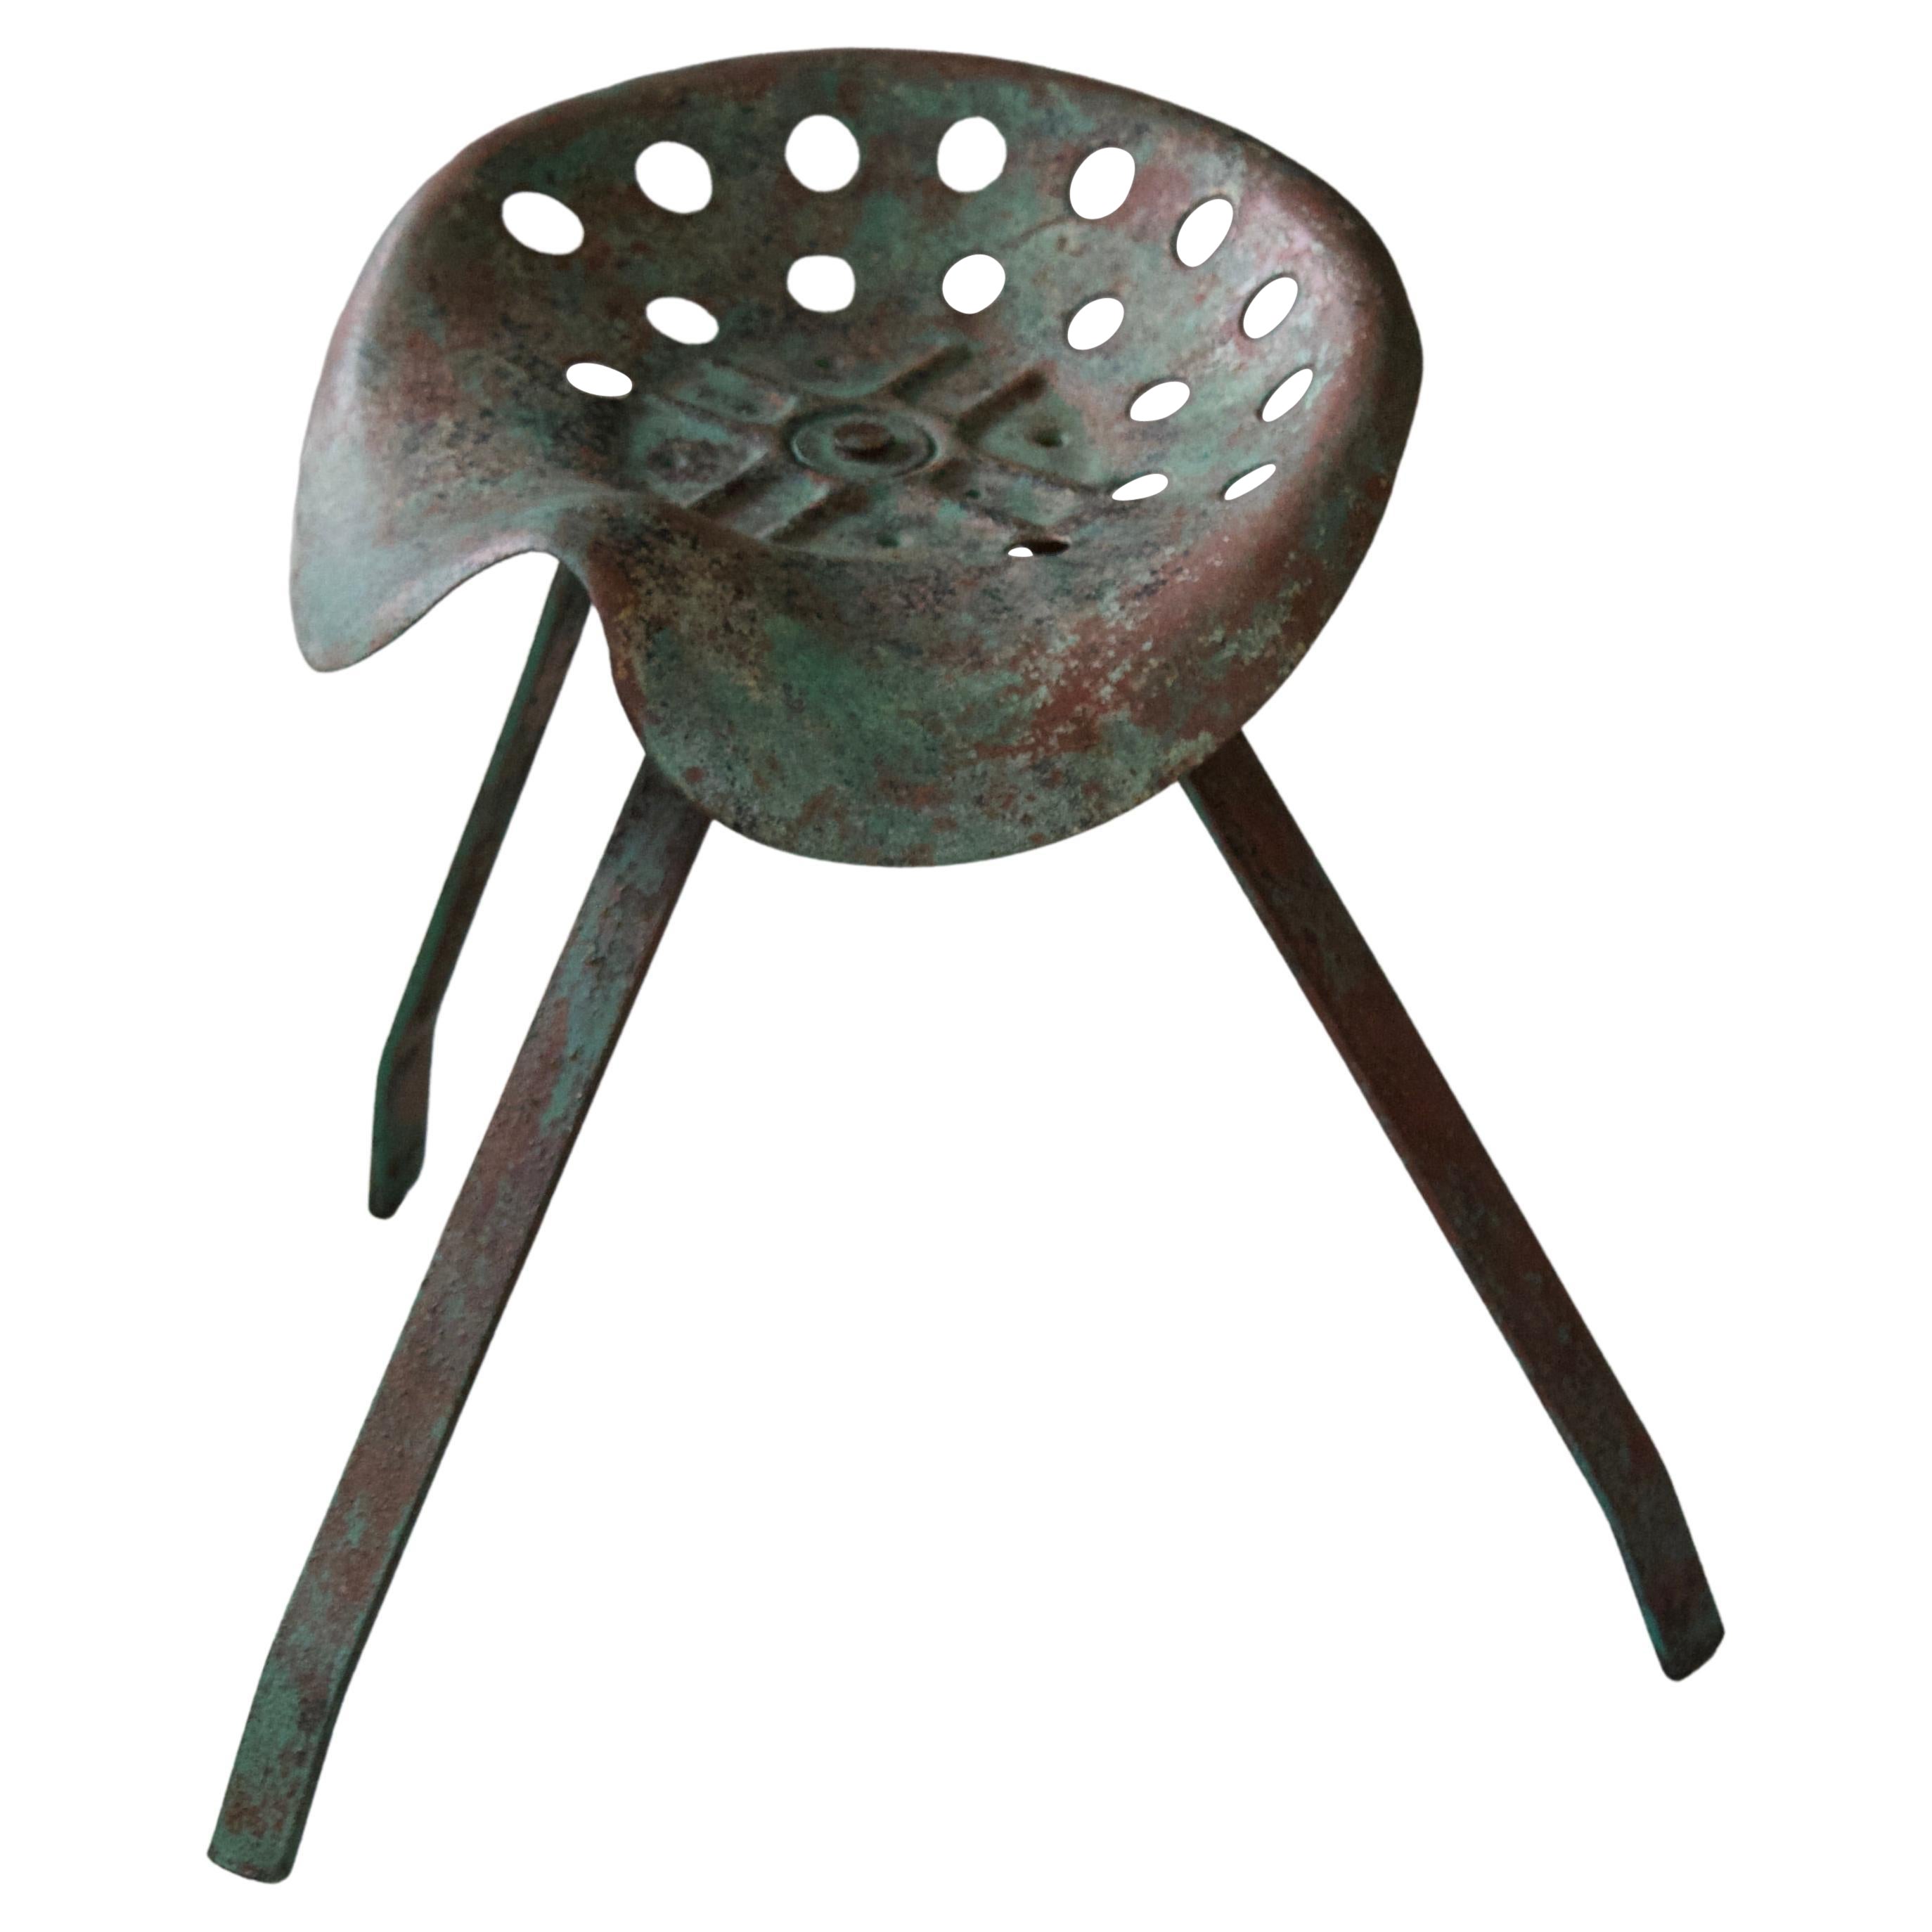 American, Industrial Stool, Green-Painted Metal, United States, 1940s